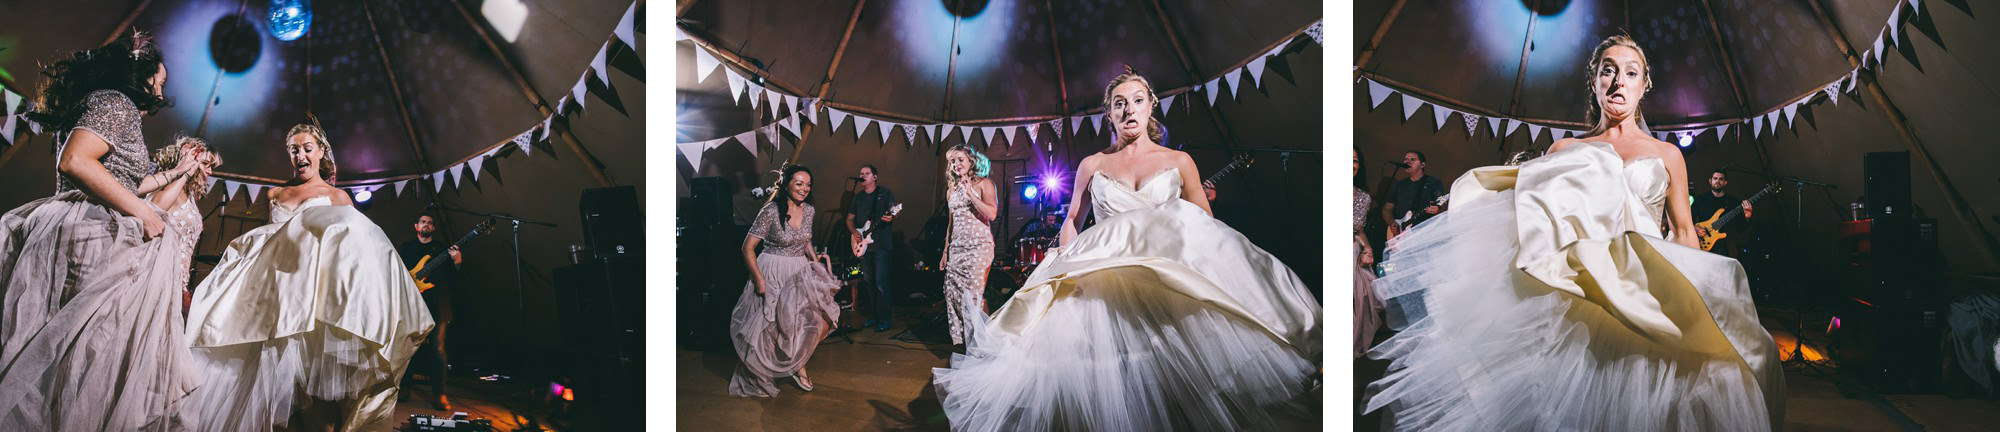 tipi-wedding-suffolk-by-james-powell-photography-055